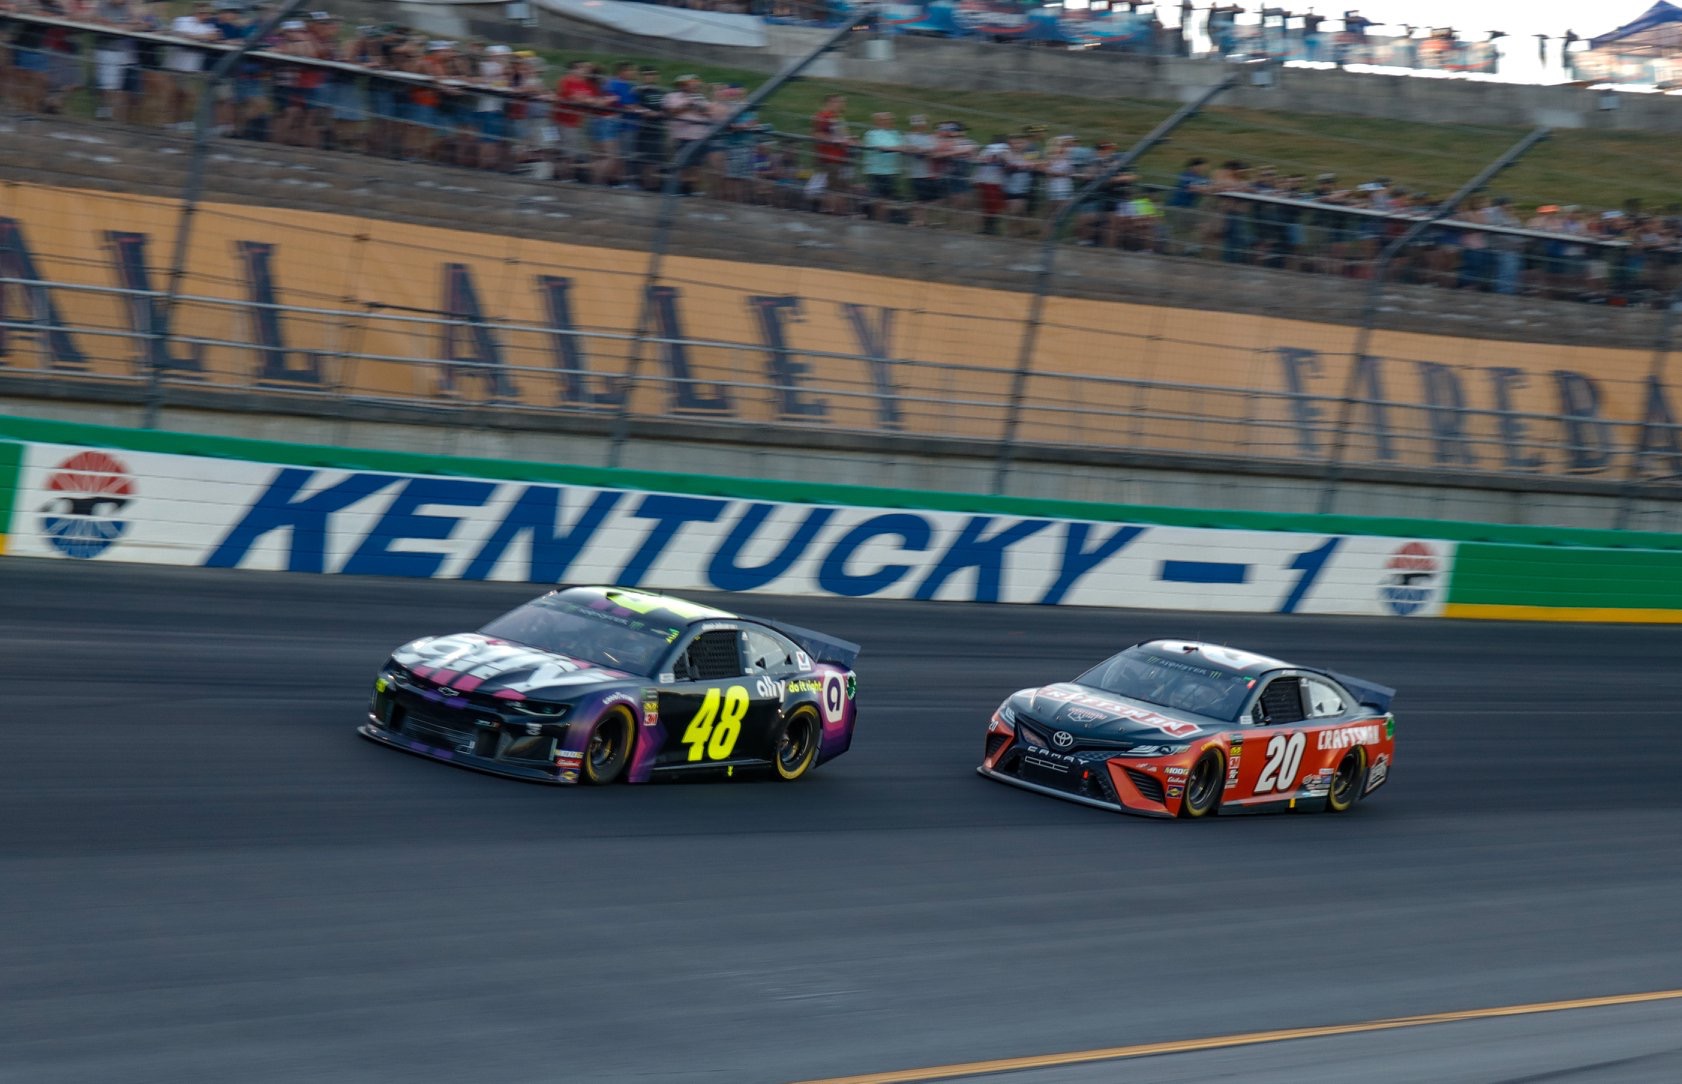 While Jimmie Johnson returns to the No. 48 car today, who'll replace him next year? (Photo Credit: Stephen Conley/TPF)